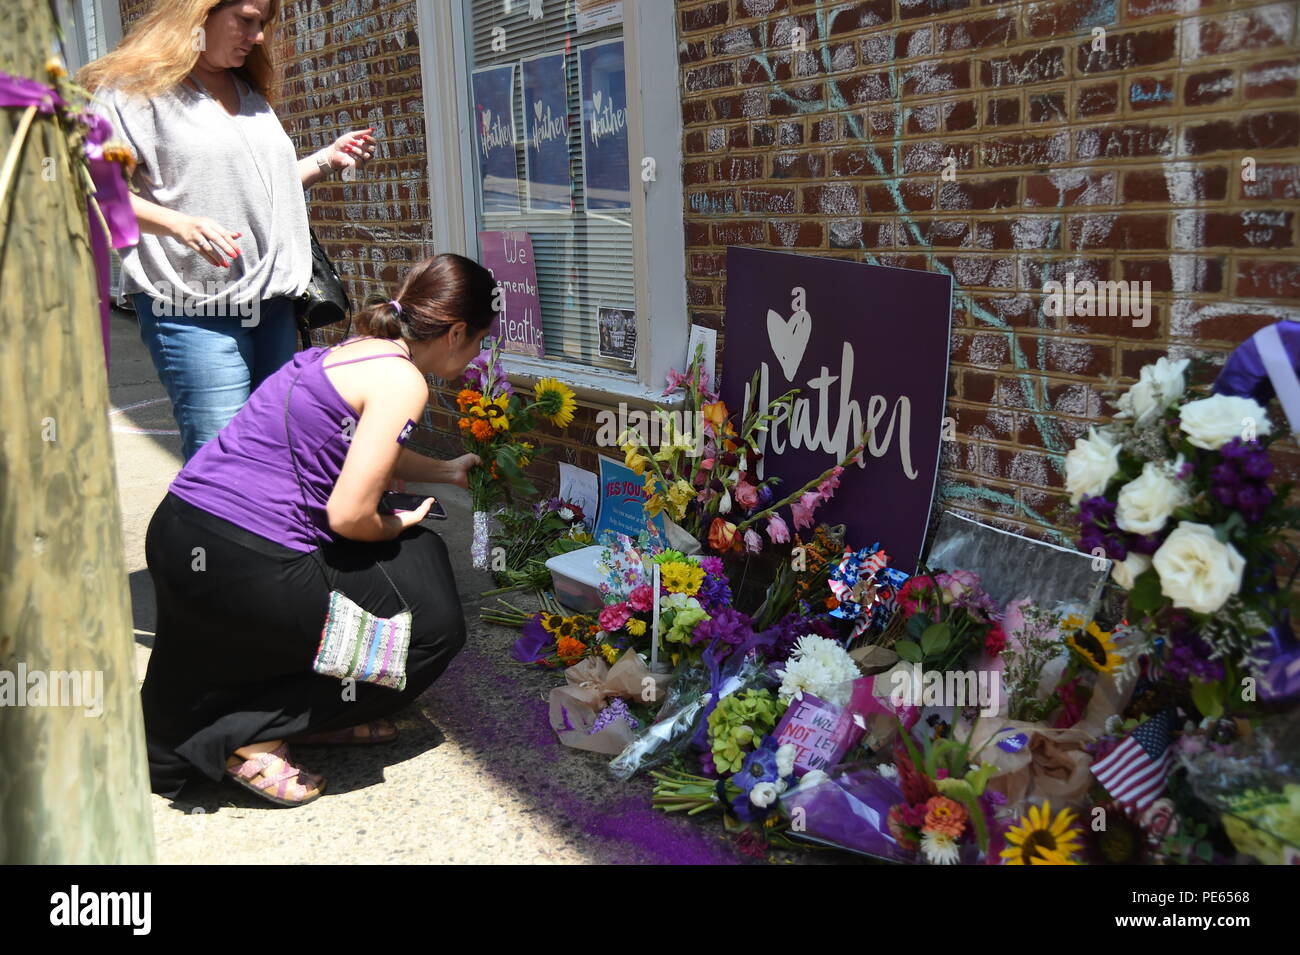 (180812) -- WASHINGTON, Aug. 12, 2018 (Xinhua) -- People pay condolences to Heather Heyer at the street corner where she was killed in Charlottesville, Virginia, the United States, on Aug. 10, 2018. A year after a white nationalist rally traumatized Charlottesville, in the U.S. state of Virginia, with riots and blood, the city is still healing from the shock. On Aug. 12, 2017, white supremacists and members of other hate groups gathered in Charlottesville for a self-styled "Unite the Right" rally to protest against the city's decision to remove a Confederate statue before clashing violently wi Stock Photo